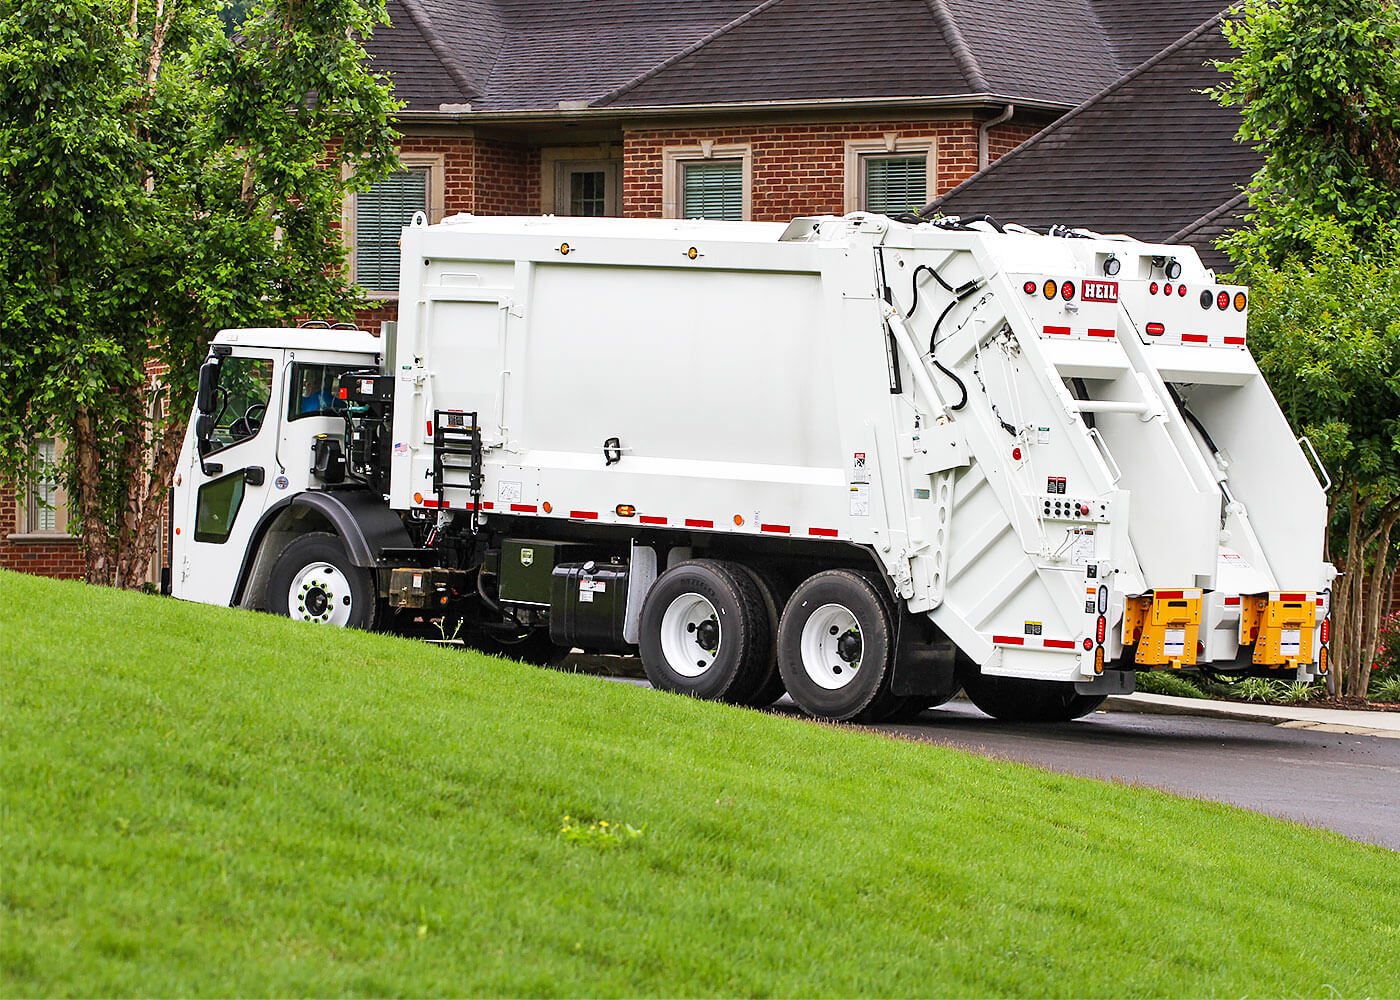 Rear Loader garbage truck for recycling with two split compartments